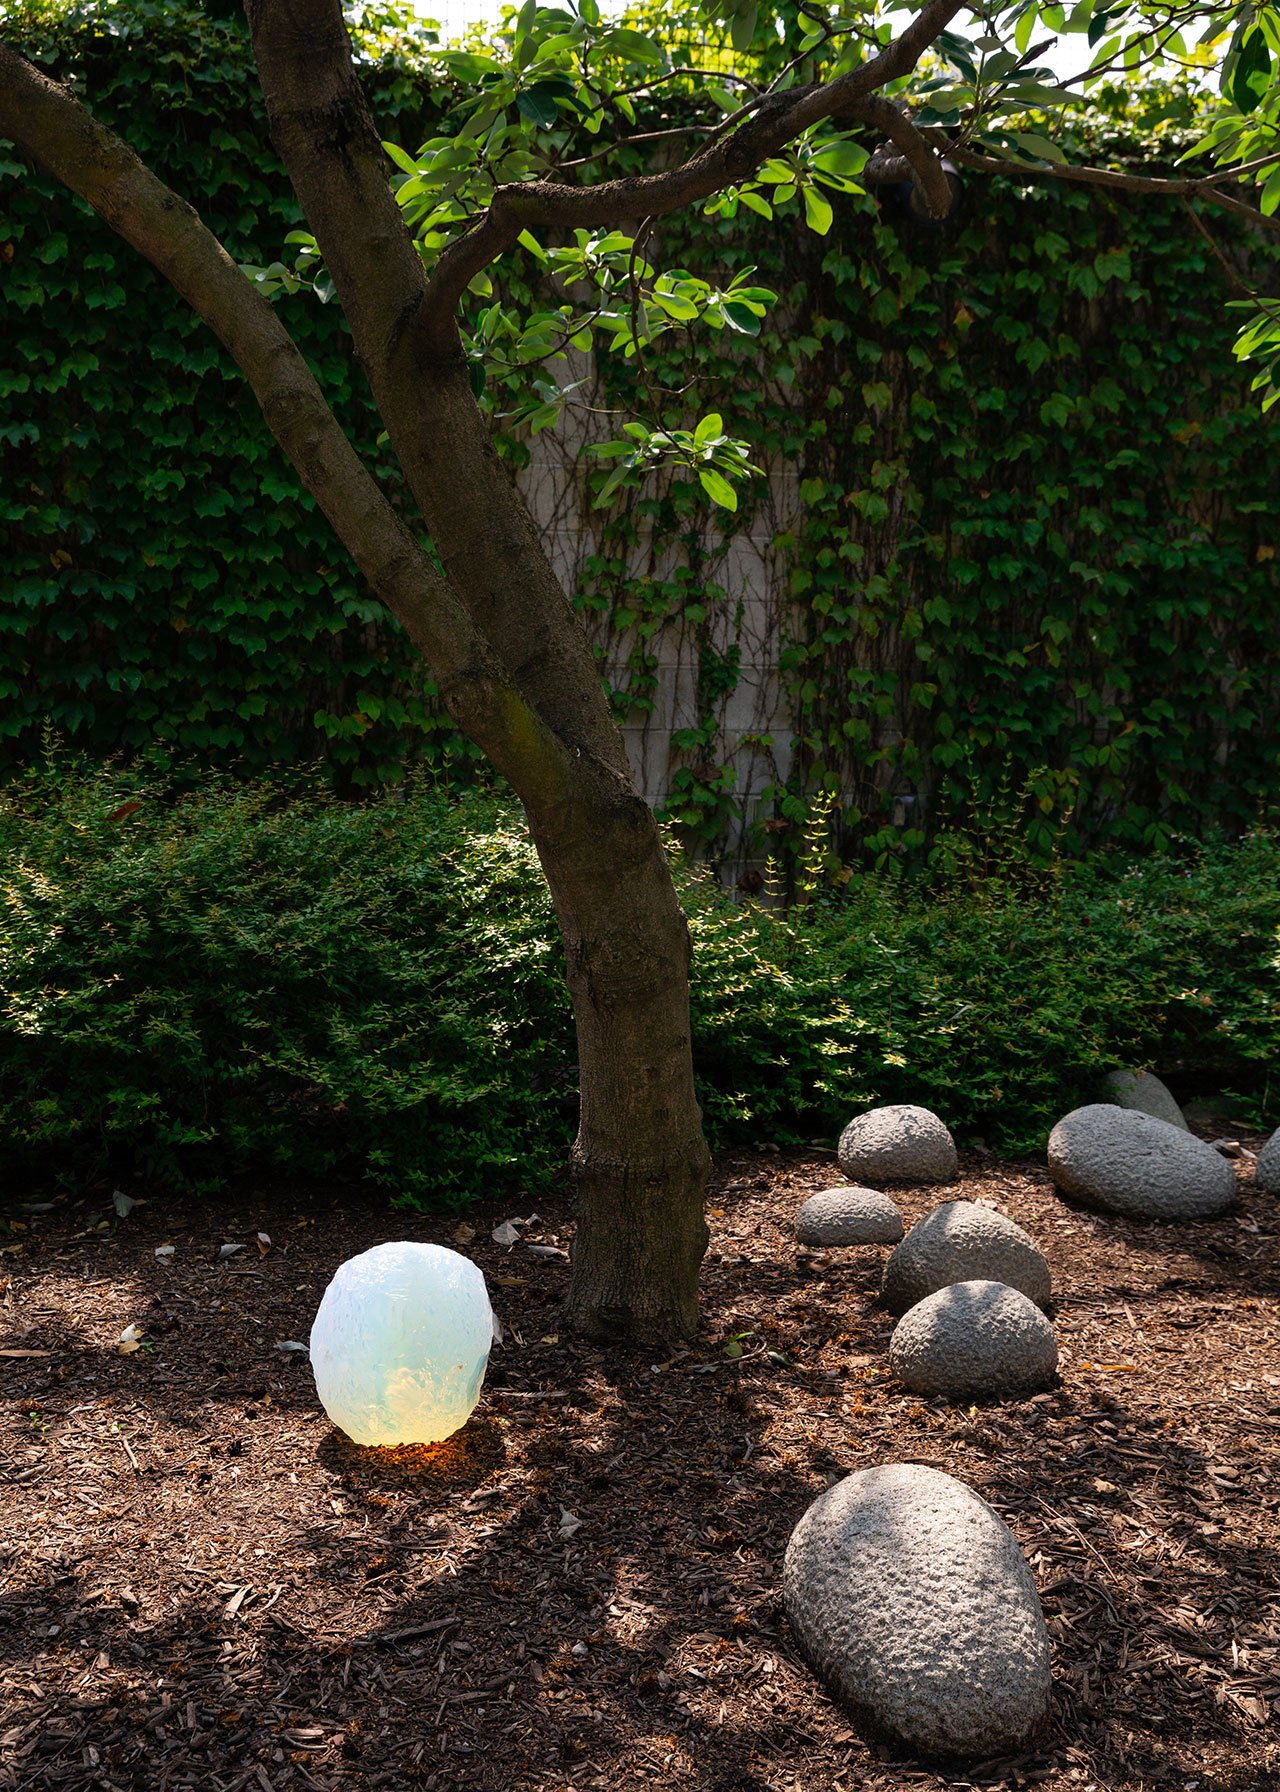 Installation view. "Objects of Common Interest: Hard, Soft, and All Lit Up with Nowhere to Go", Noguchi Museum, New York. Photography by Brian W. Ferry. Artworks © Objects of Common Interest and © The Isamu Noguchi Foundation and Garden Museum / Artists Rights Society